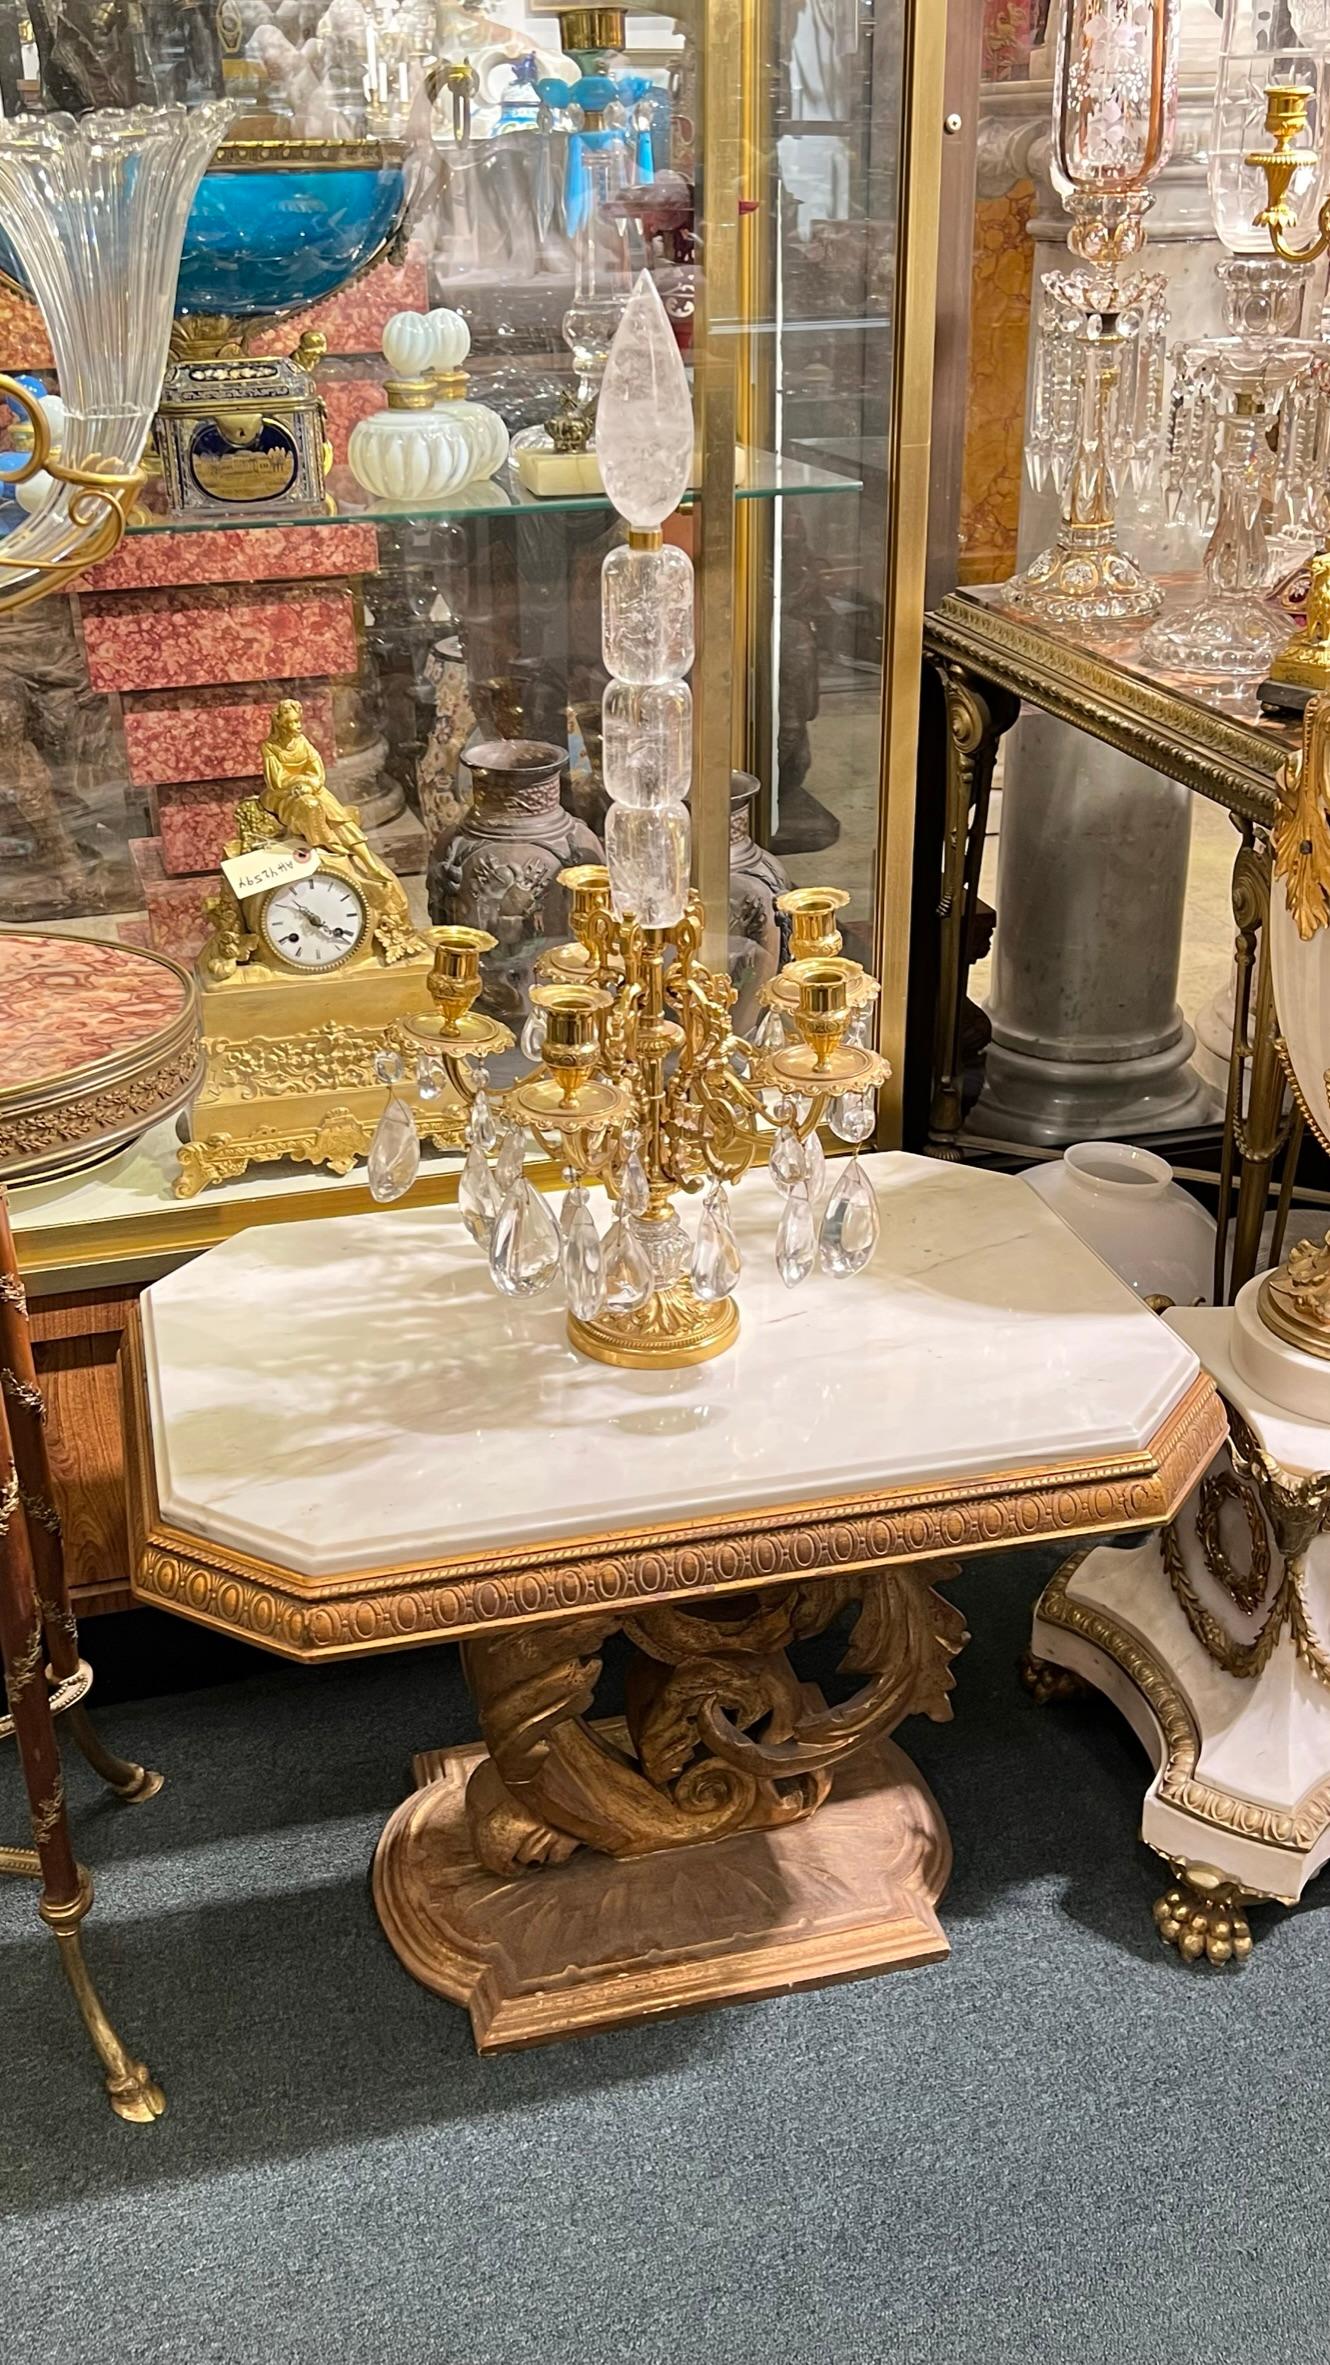 Pair of French midcentury Roccoco style Carved Giltwood Pedestal Side Tables with White Marble Tops.